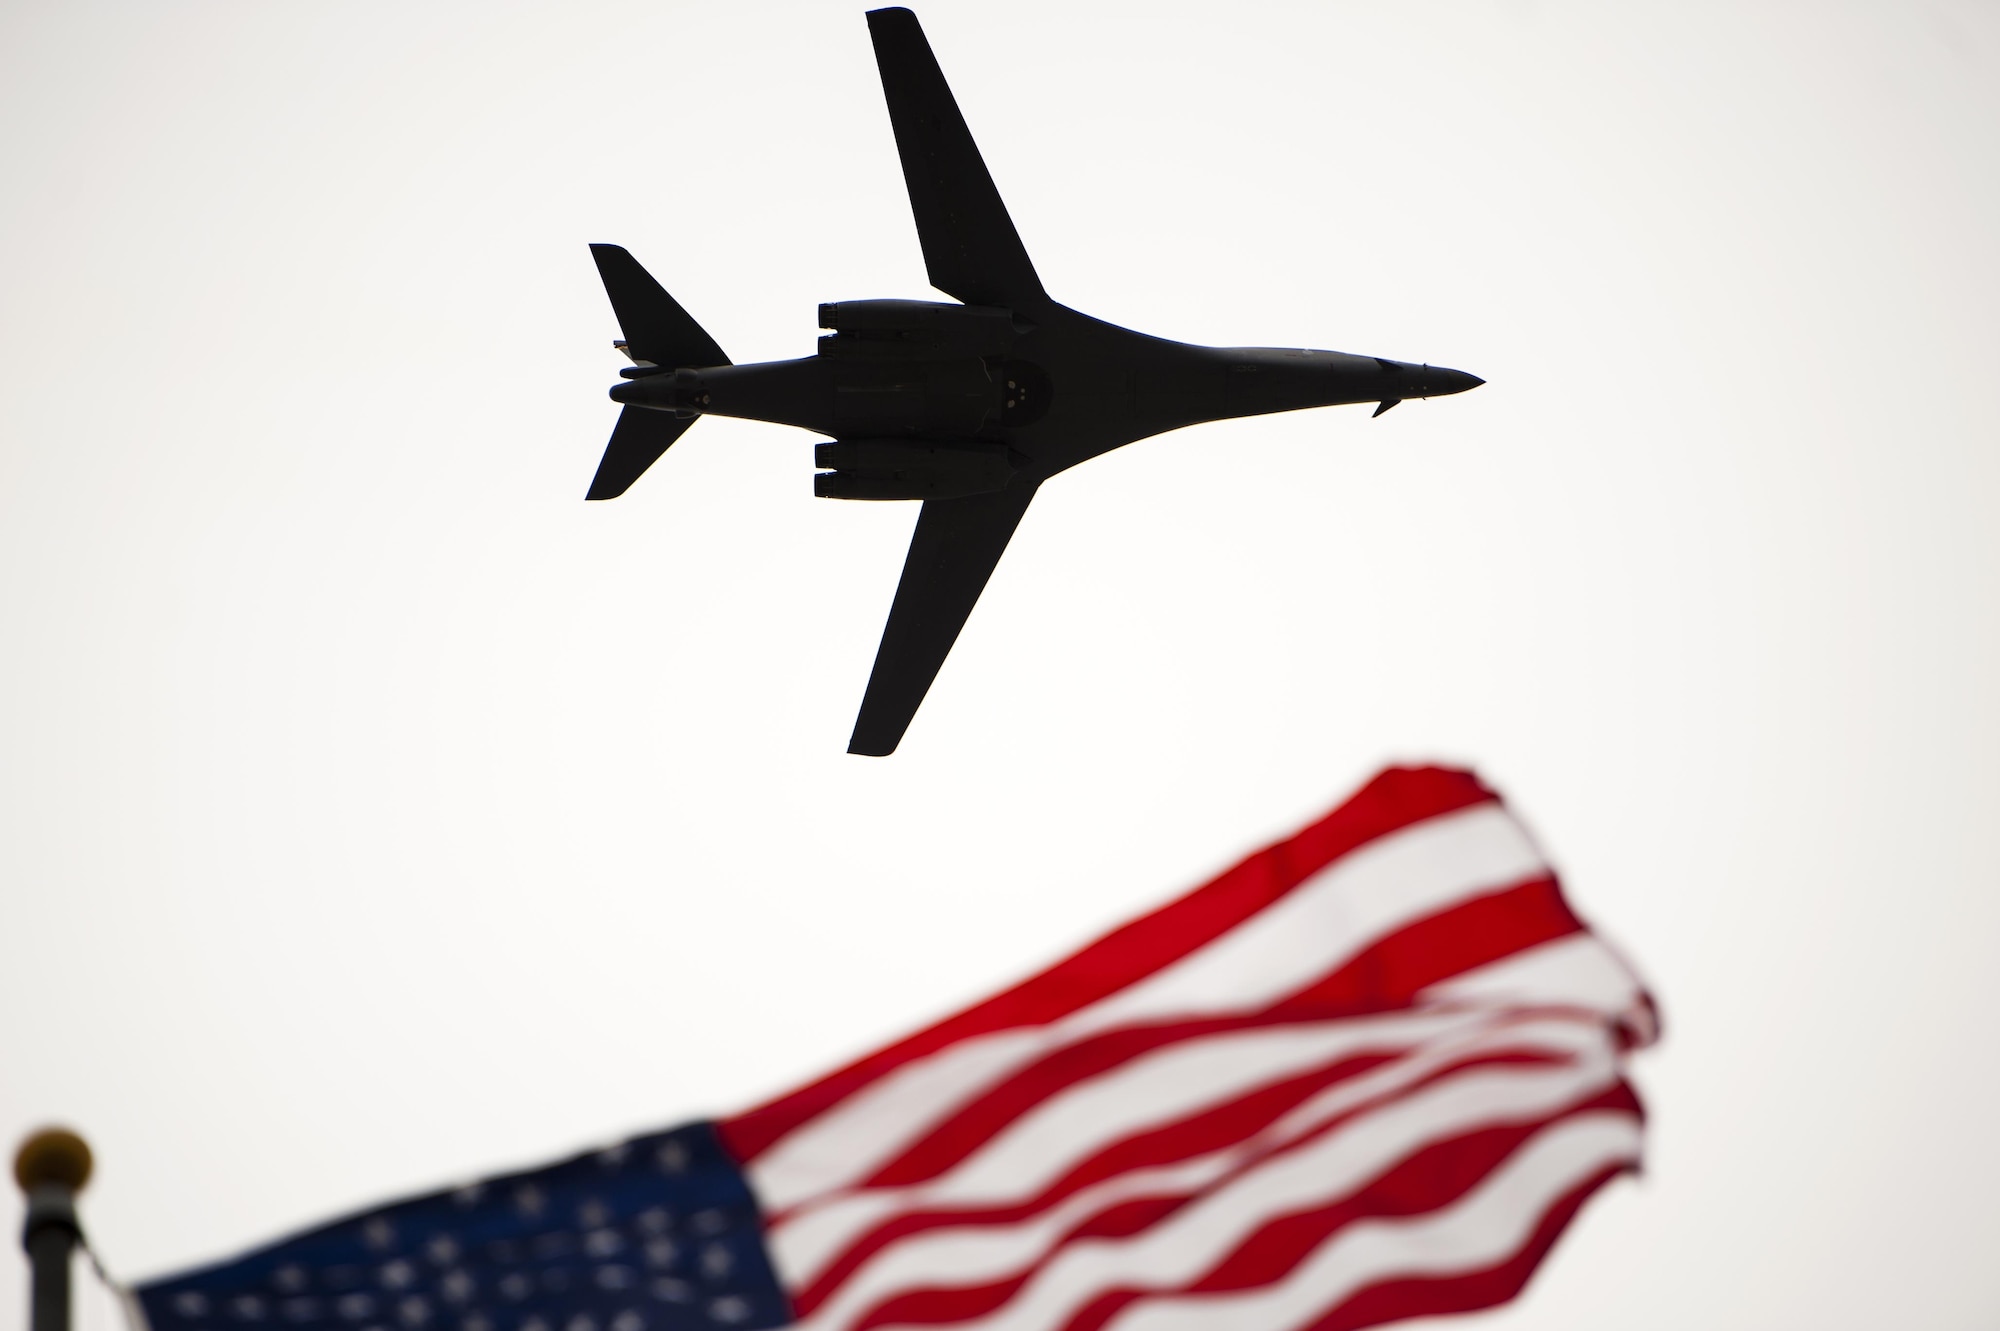 A Rockwell B-1 Lancer flies over the Norma Brown building during the 75th Diamond Anniversary ceremony on Goodfellow Air Force Base, Texas, Jan. 26, 2016. The B-1 flew over after a Vultee BT-15 Valient flew over. Both were symbolic; the vintage BT-15 representing the planes that Goodfellow pilots trained on, and the B-1 representing the intelligence support training the base now provides. (U.S. Air Force photo by Senior Airman Scott Jackson/Released)